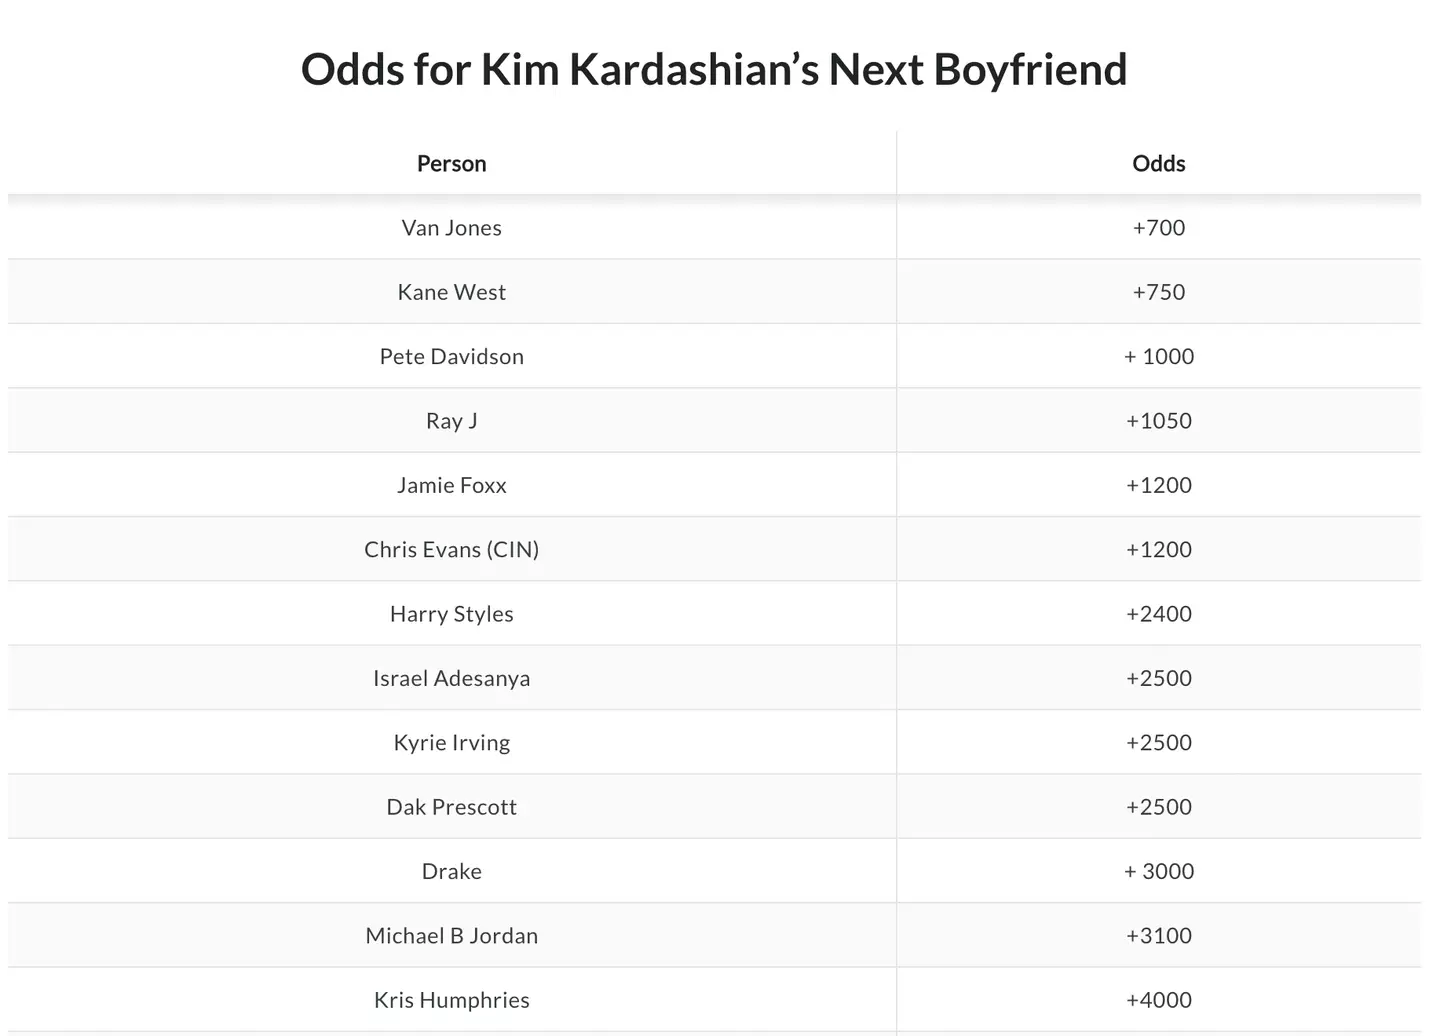 Betting sites are now offering odds on who Kim Kardashian will date next.